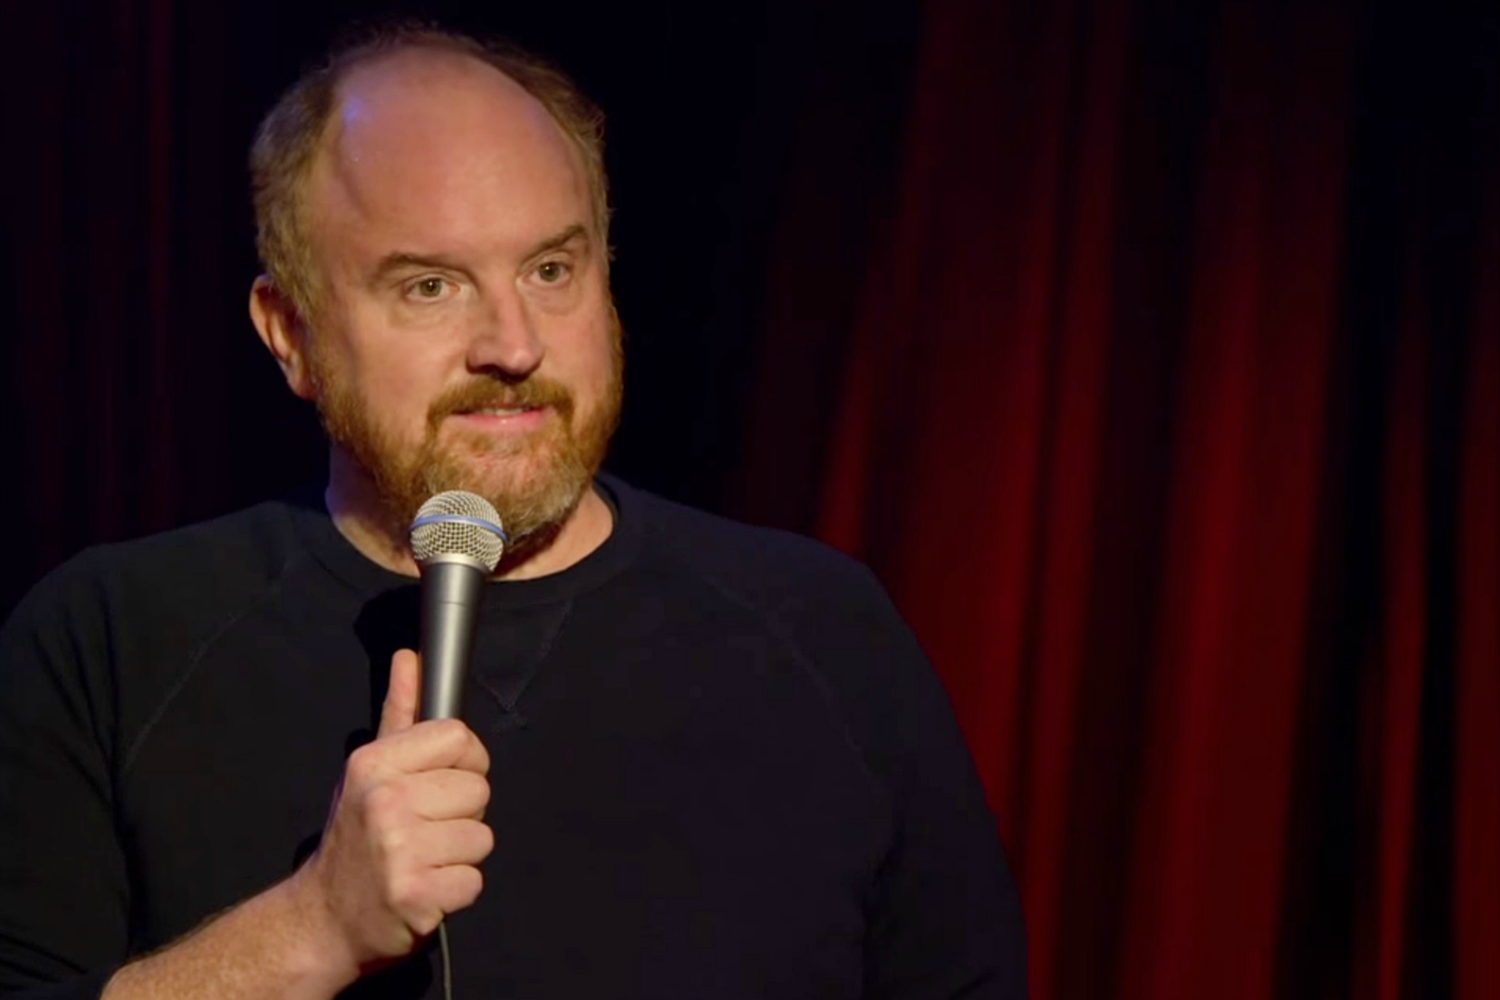 Watch Louis C.K. at The Dolby movie streaming online